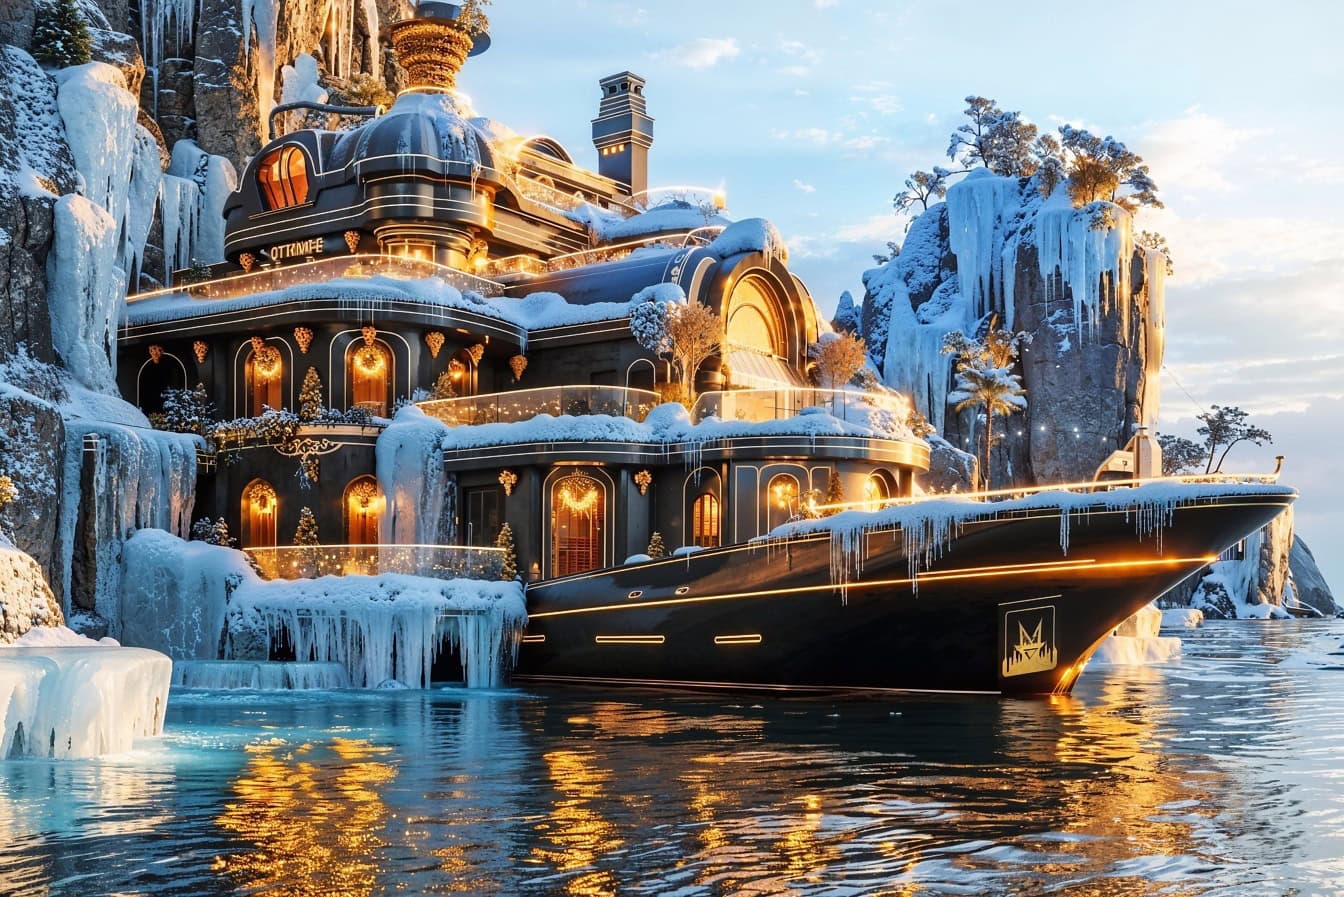 Futuristic concept of a super yacht in a frozen environment, photomontage of a winter resort by the sea